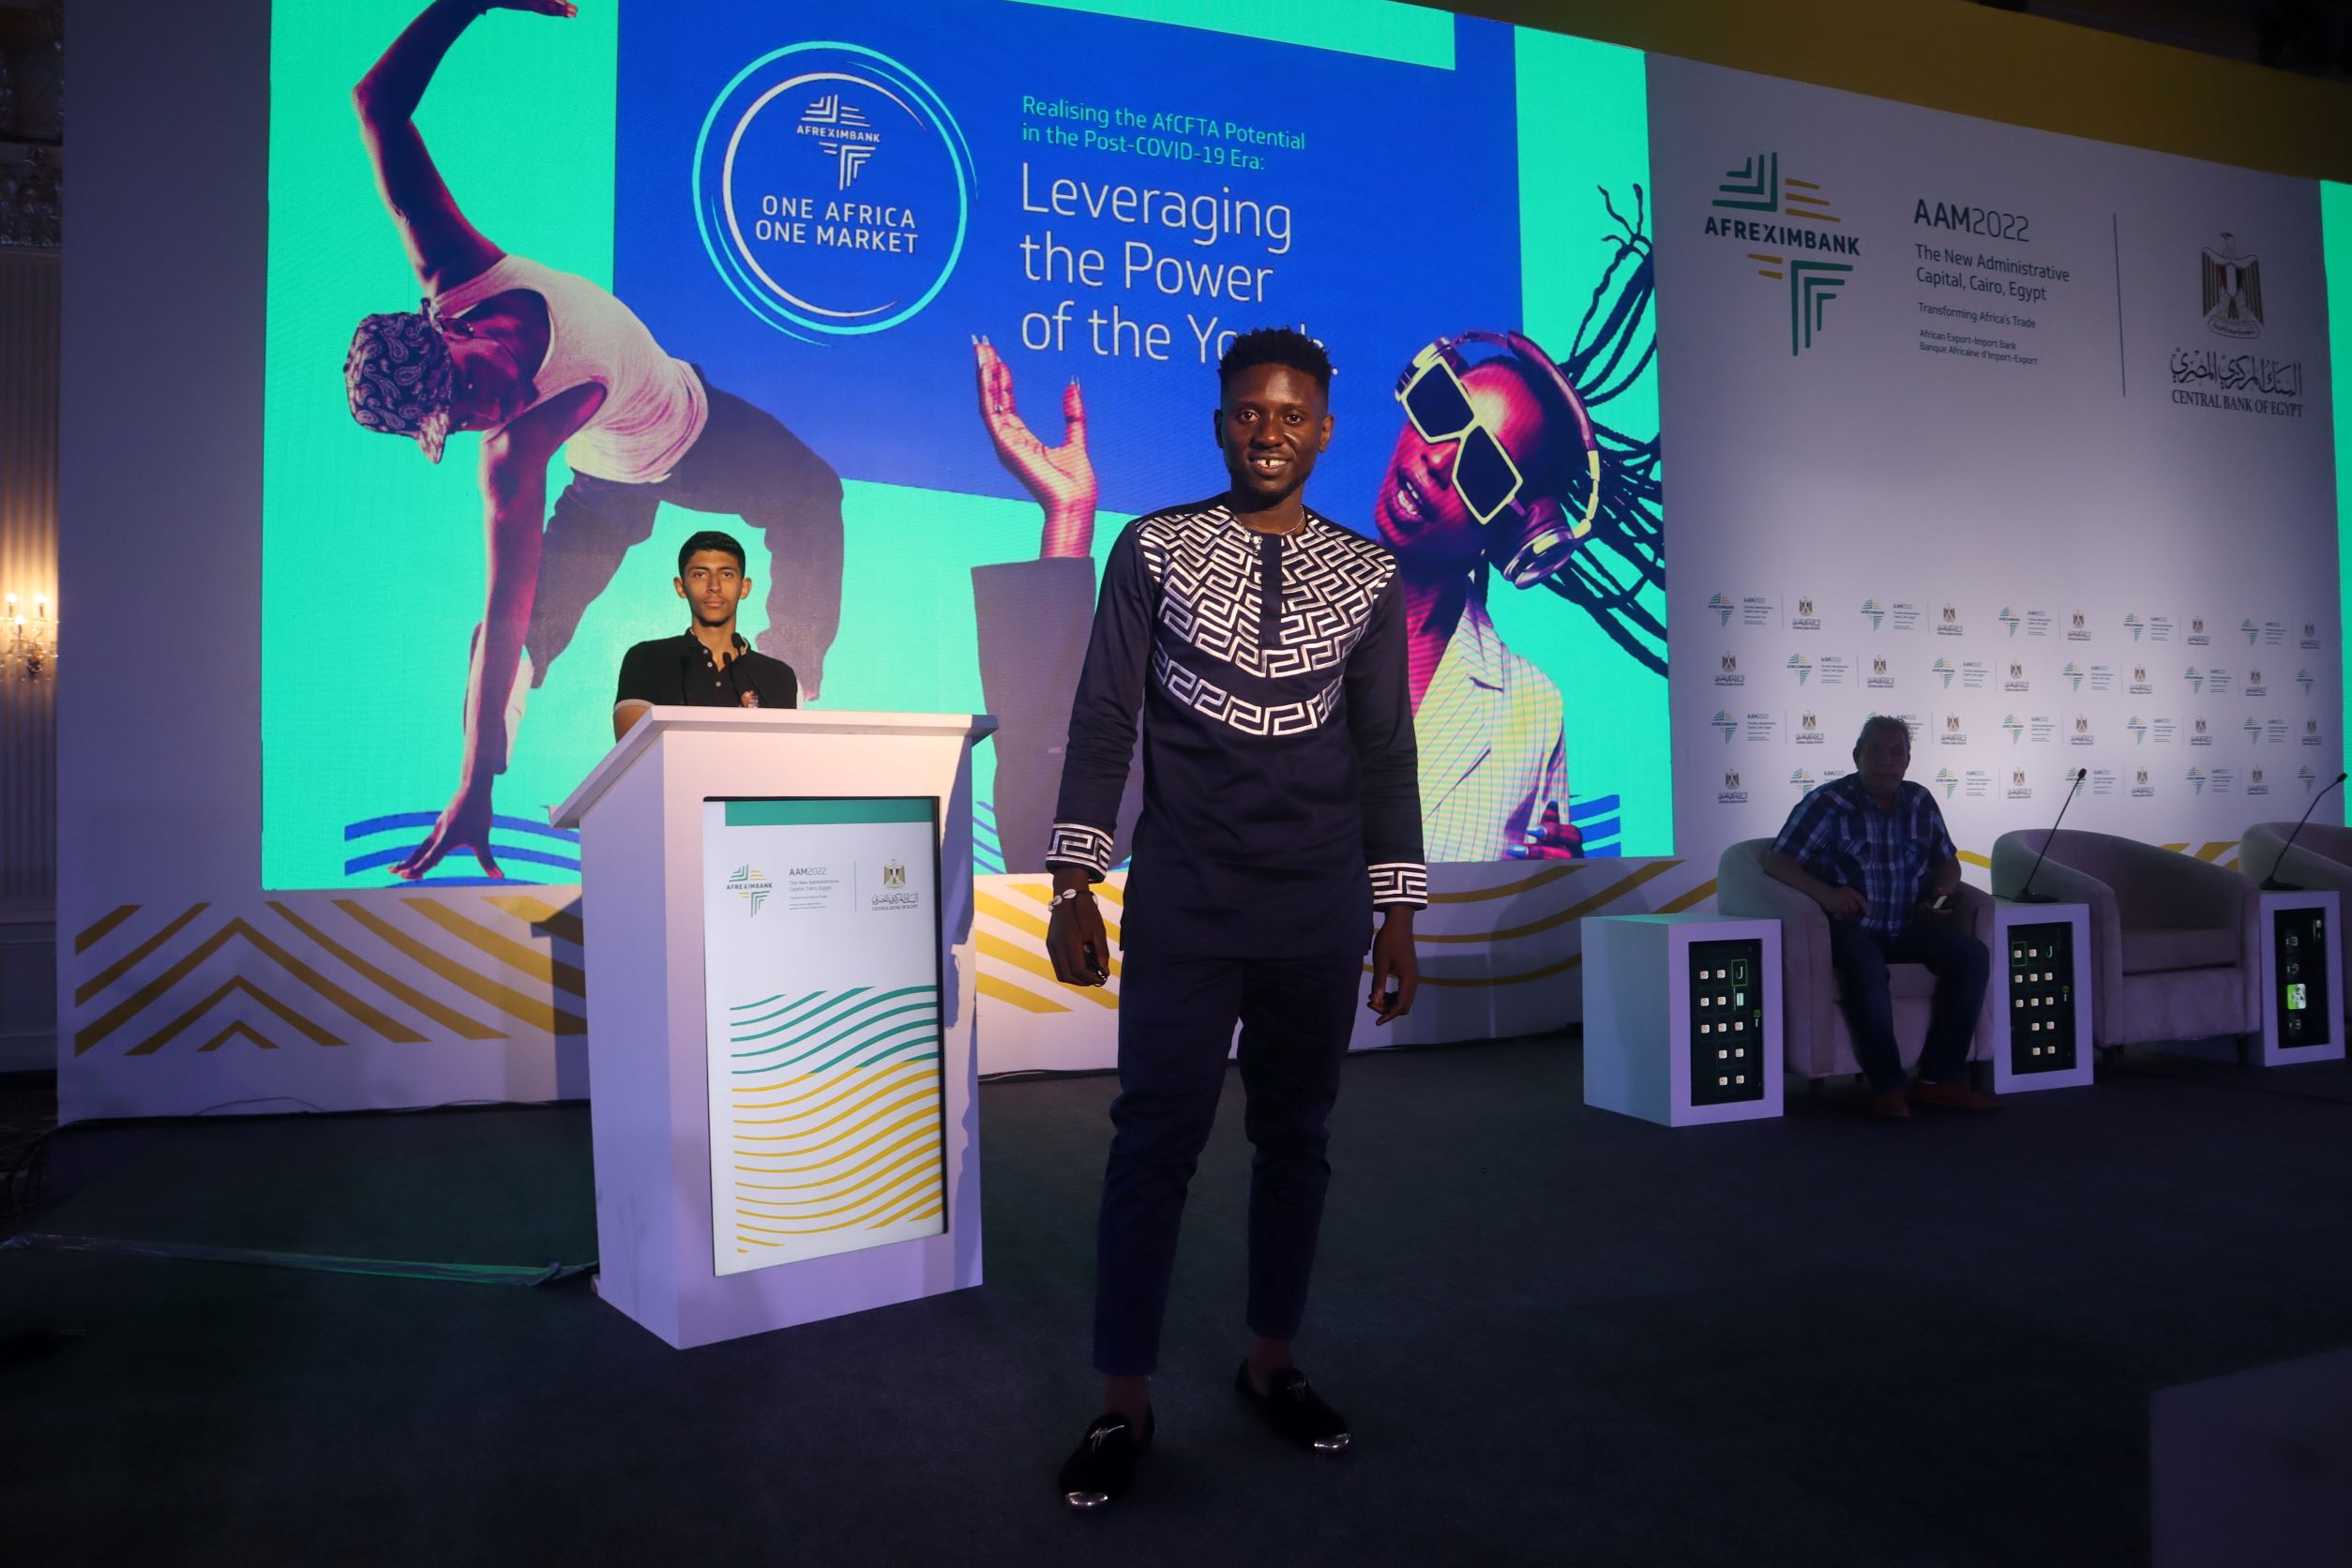 Mac Alunge performs in Cairo - Egypt for Afreximbank Annual General Meeting 2022 by Central Bank of Egypt for the President of the Arab Republic of Egypt (24)